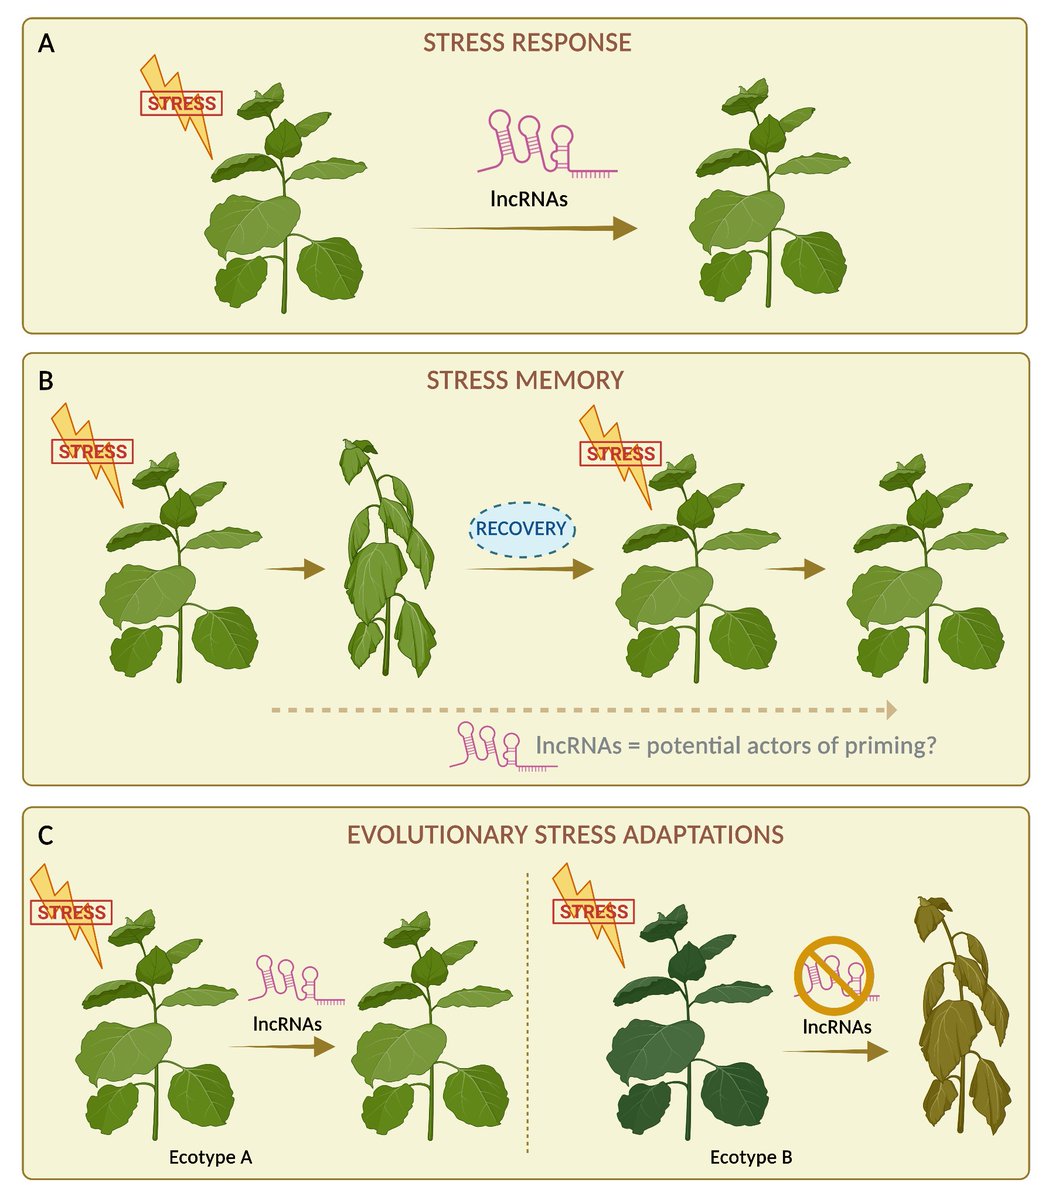 🌱From environmental responses to adaptation: the roles of plant lncRNAs 🧬🍃 Dive into the latest publication from the REGARN team. @traubenik, Céline Charon and @BleinThomas describe the roles of plant lncRNAs in responding to environmental challenges.  doi.org/10.1093/plphys…